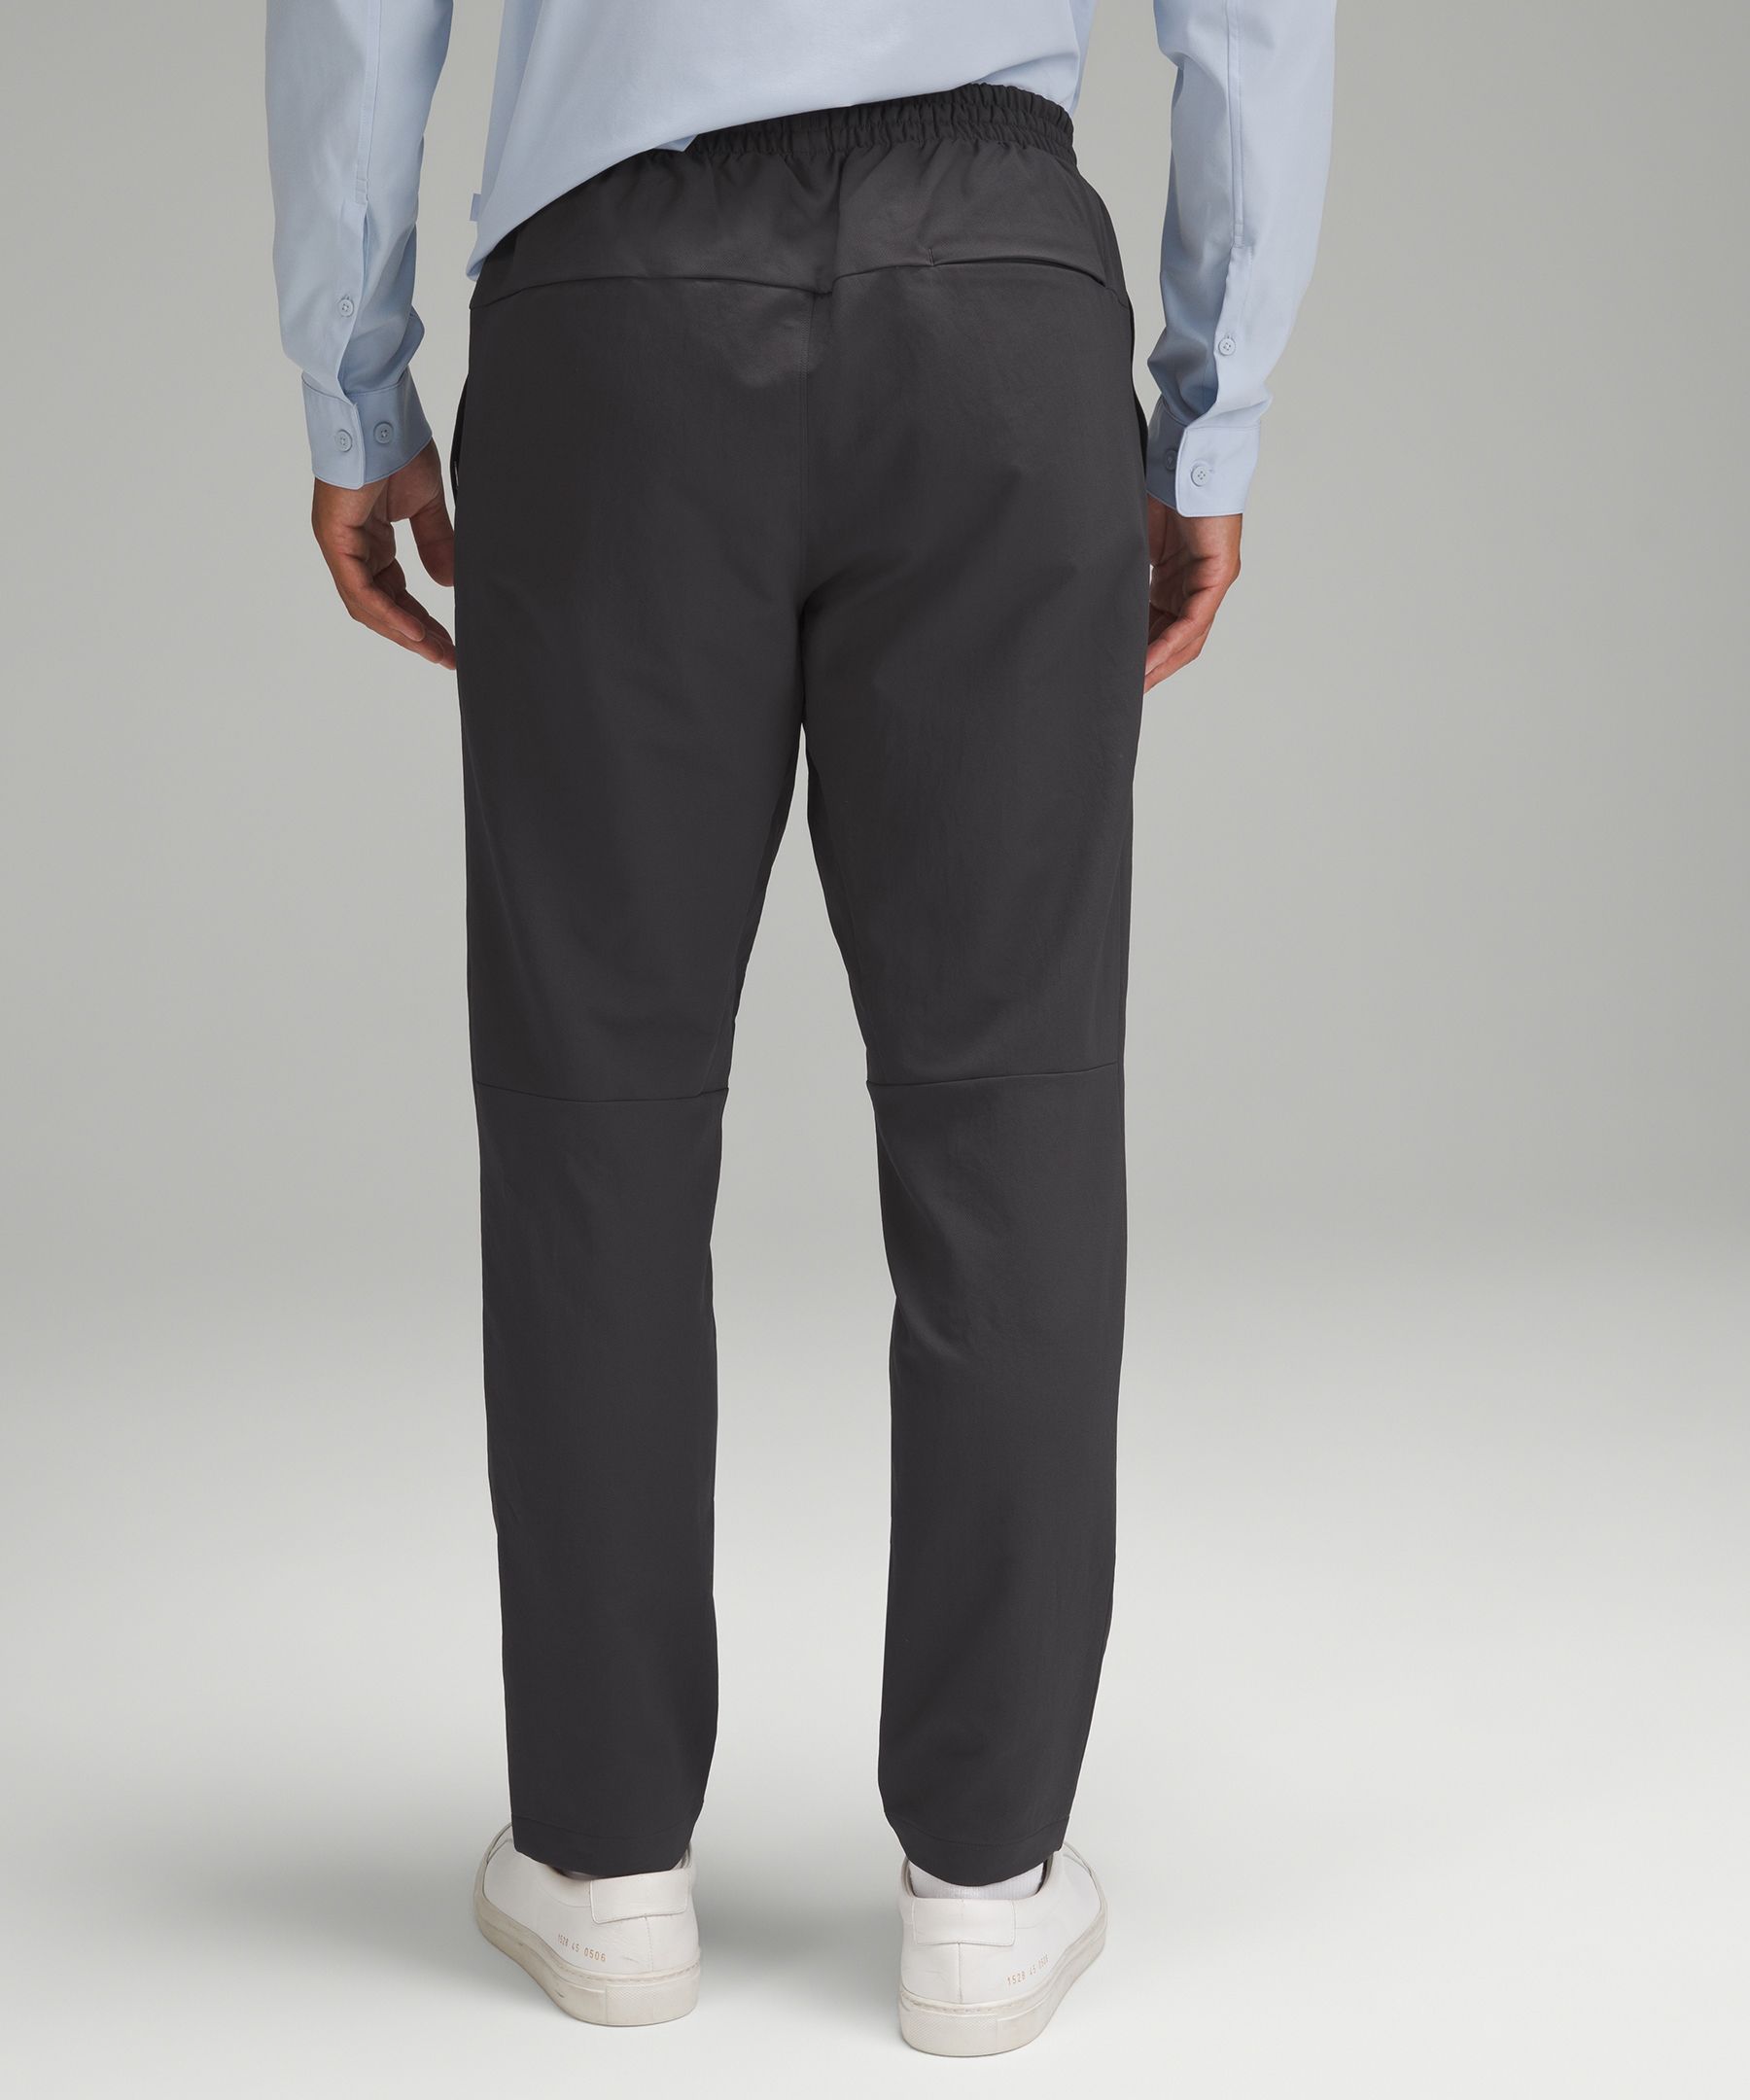 SELL] [US] Stretch High-Rise Pants grey sage size 4 NWOT // 70 shipped  PayPal or Venmo f&f only : r/lululemonBST